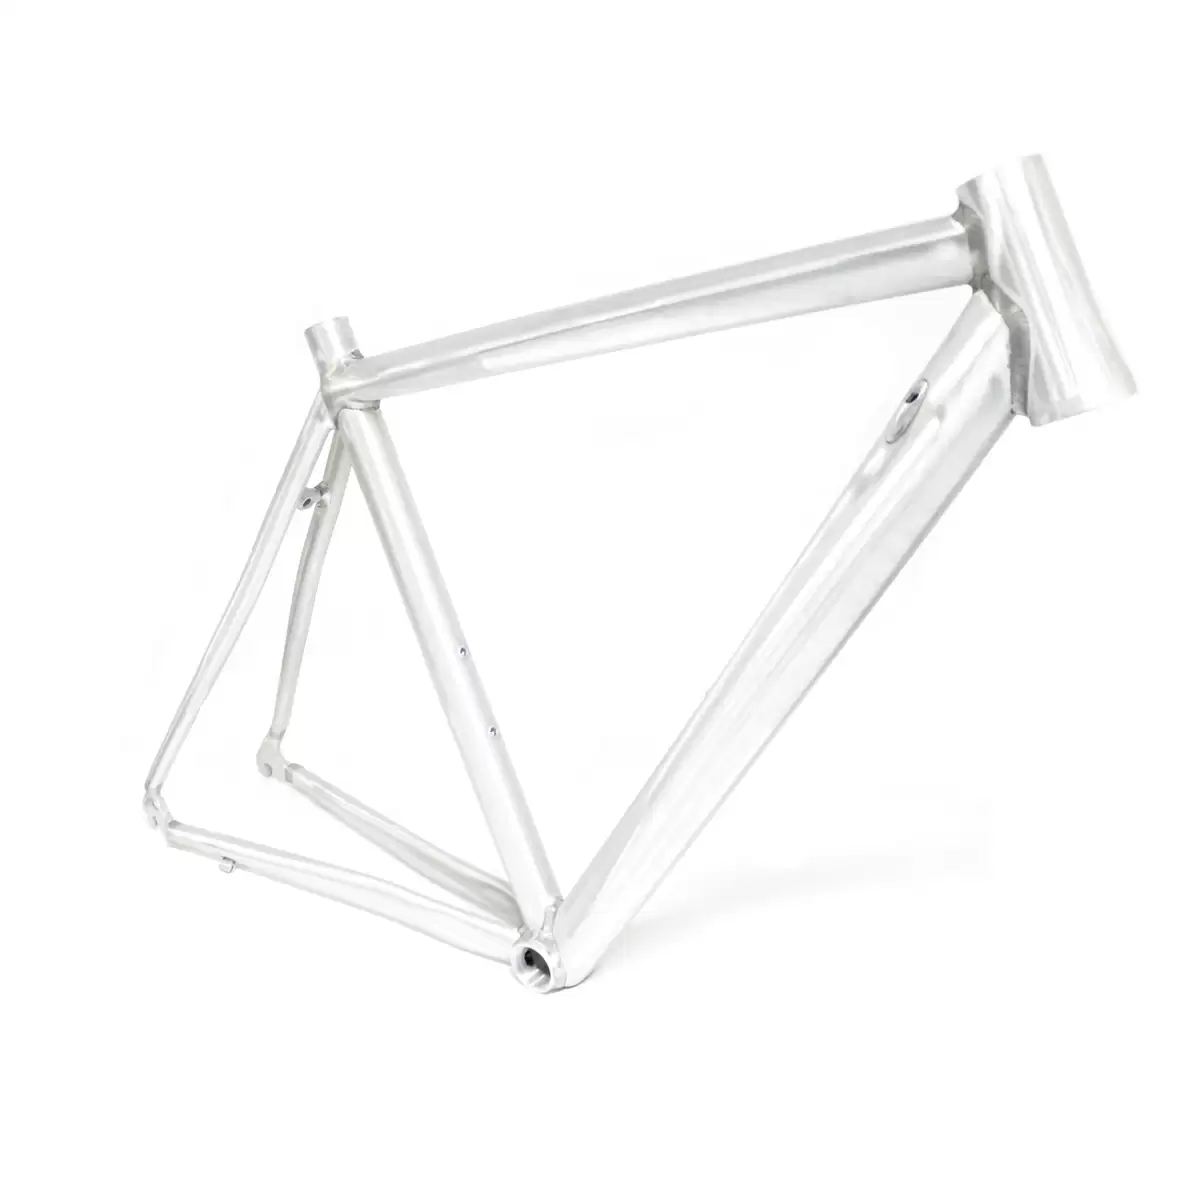 Road alloy tapered Caliper Frame size 57 - image